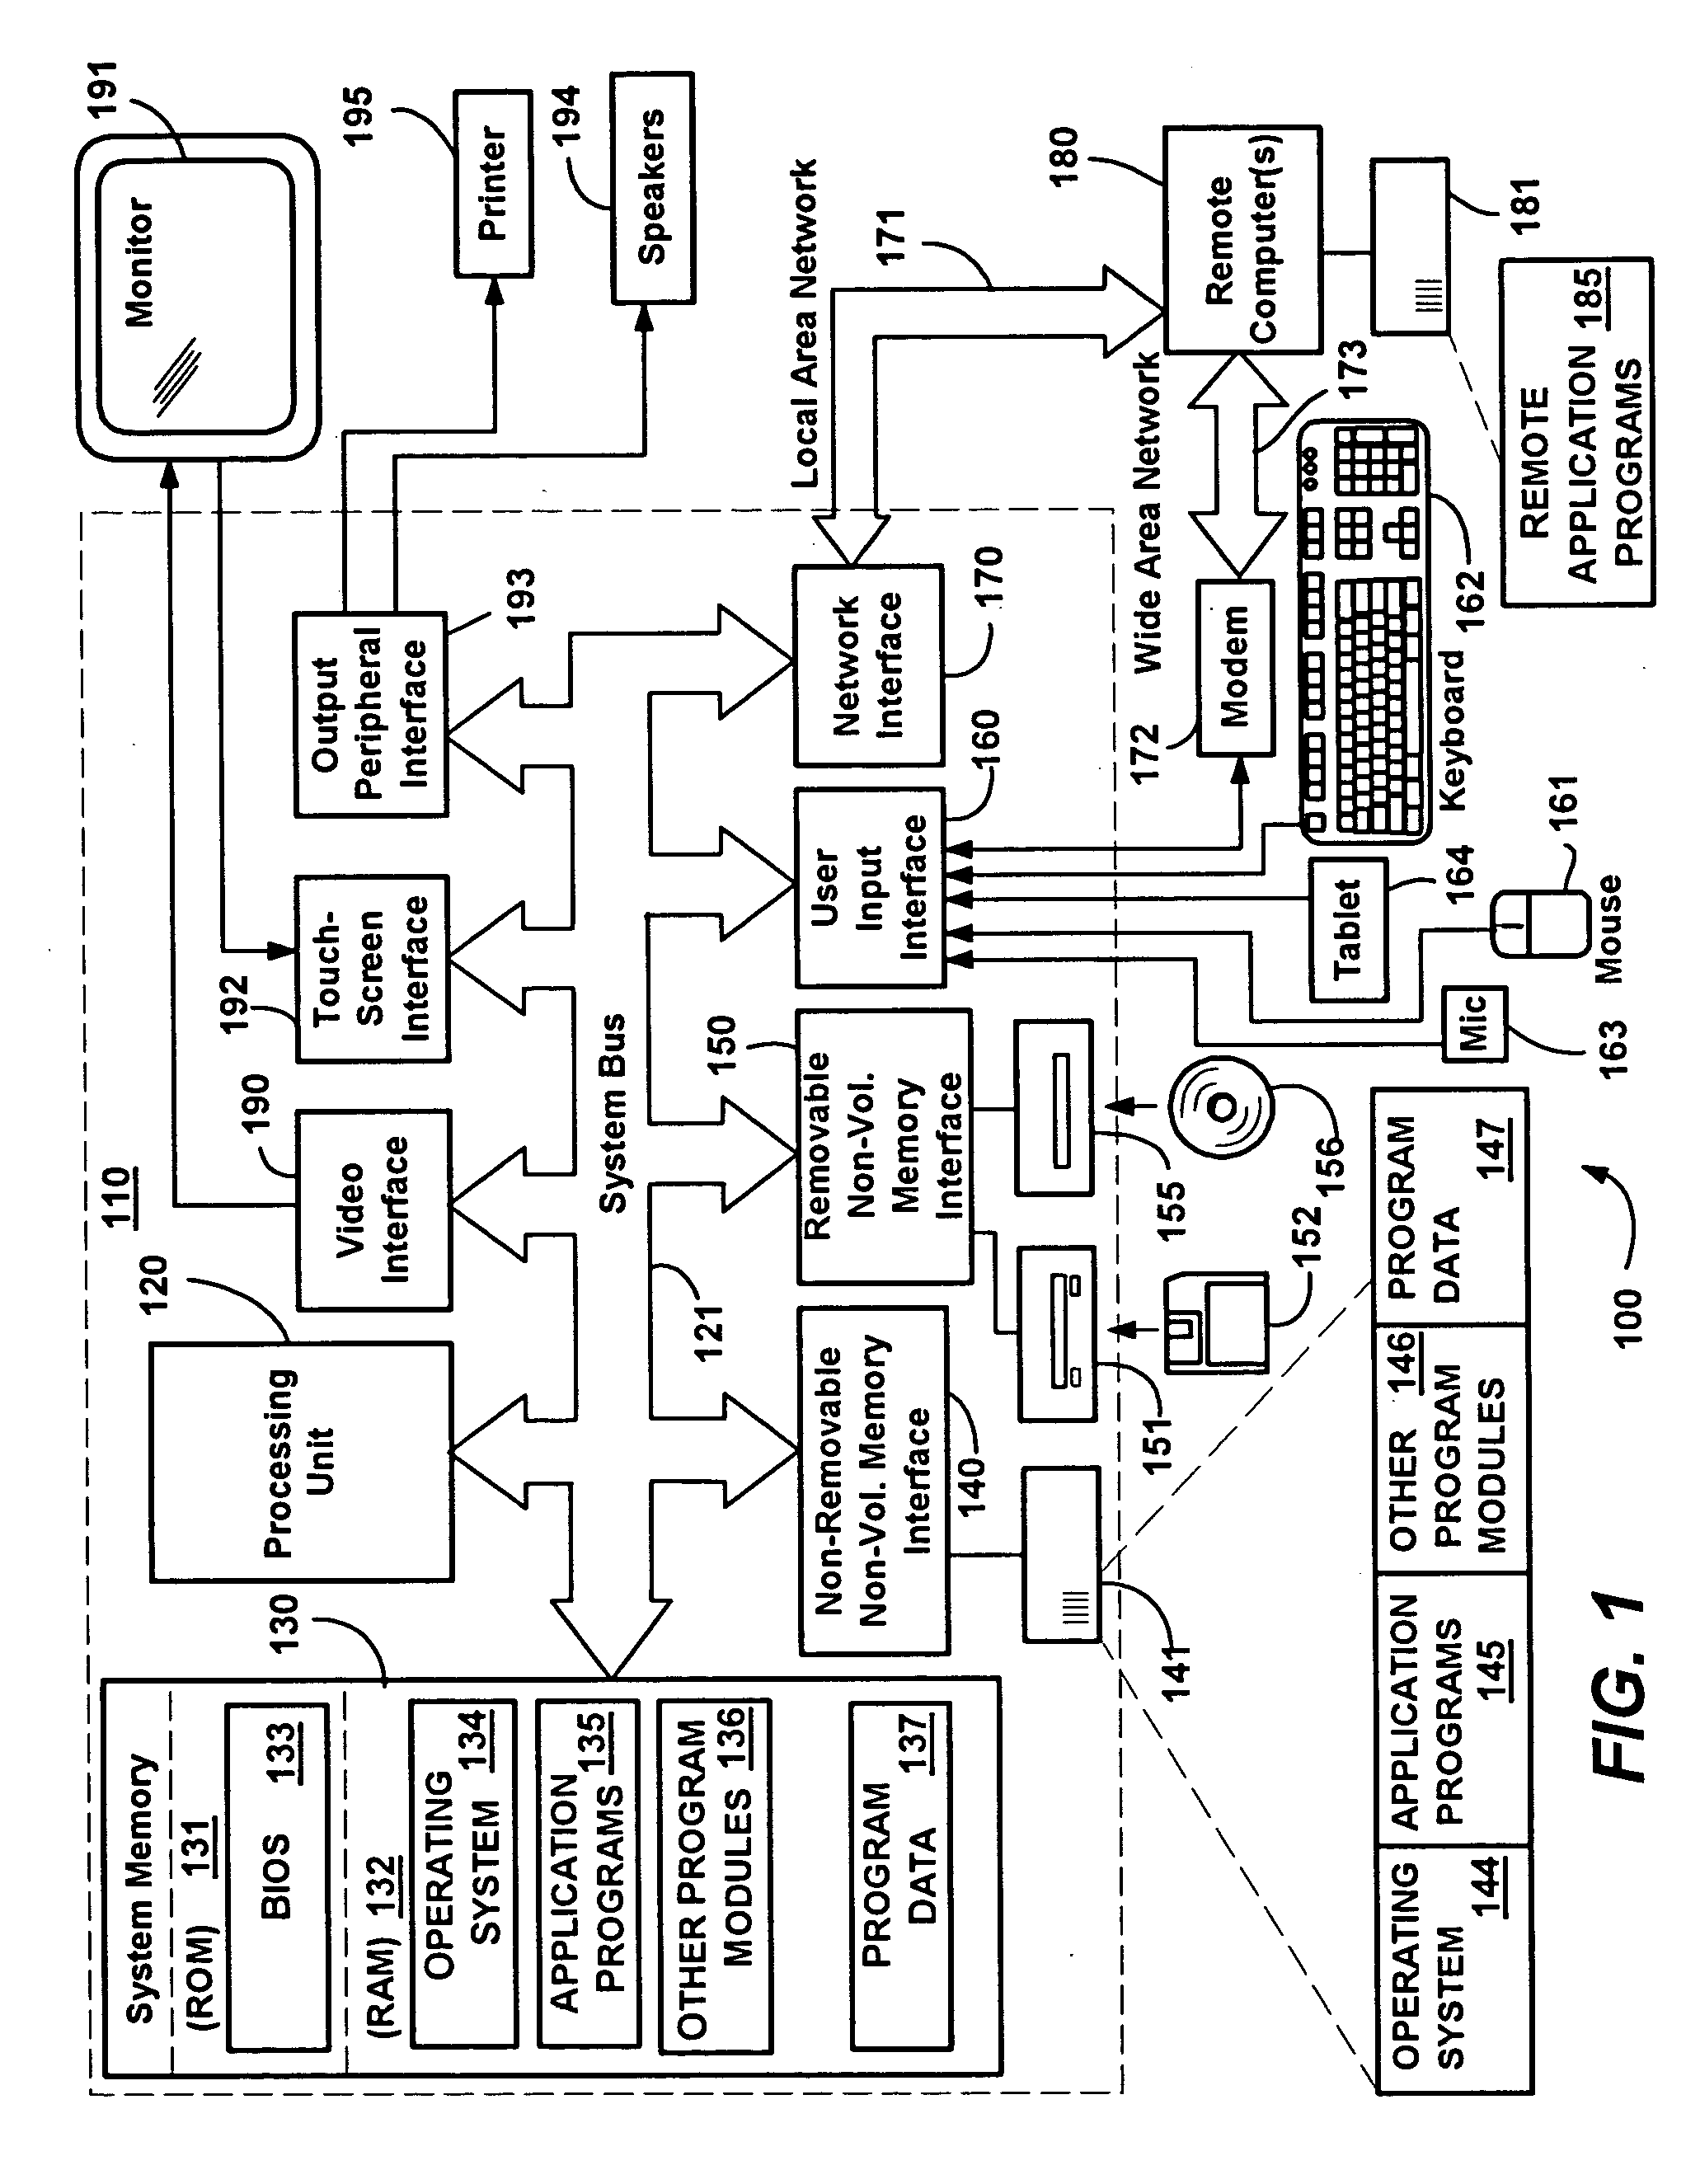 Method and system for capturing video on a personal computer